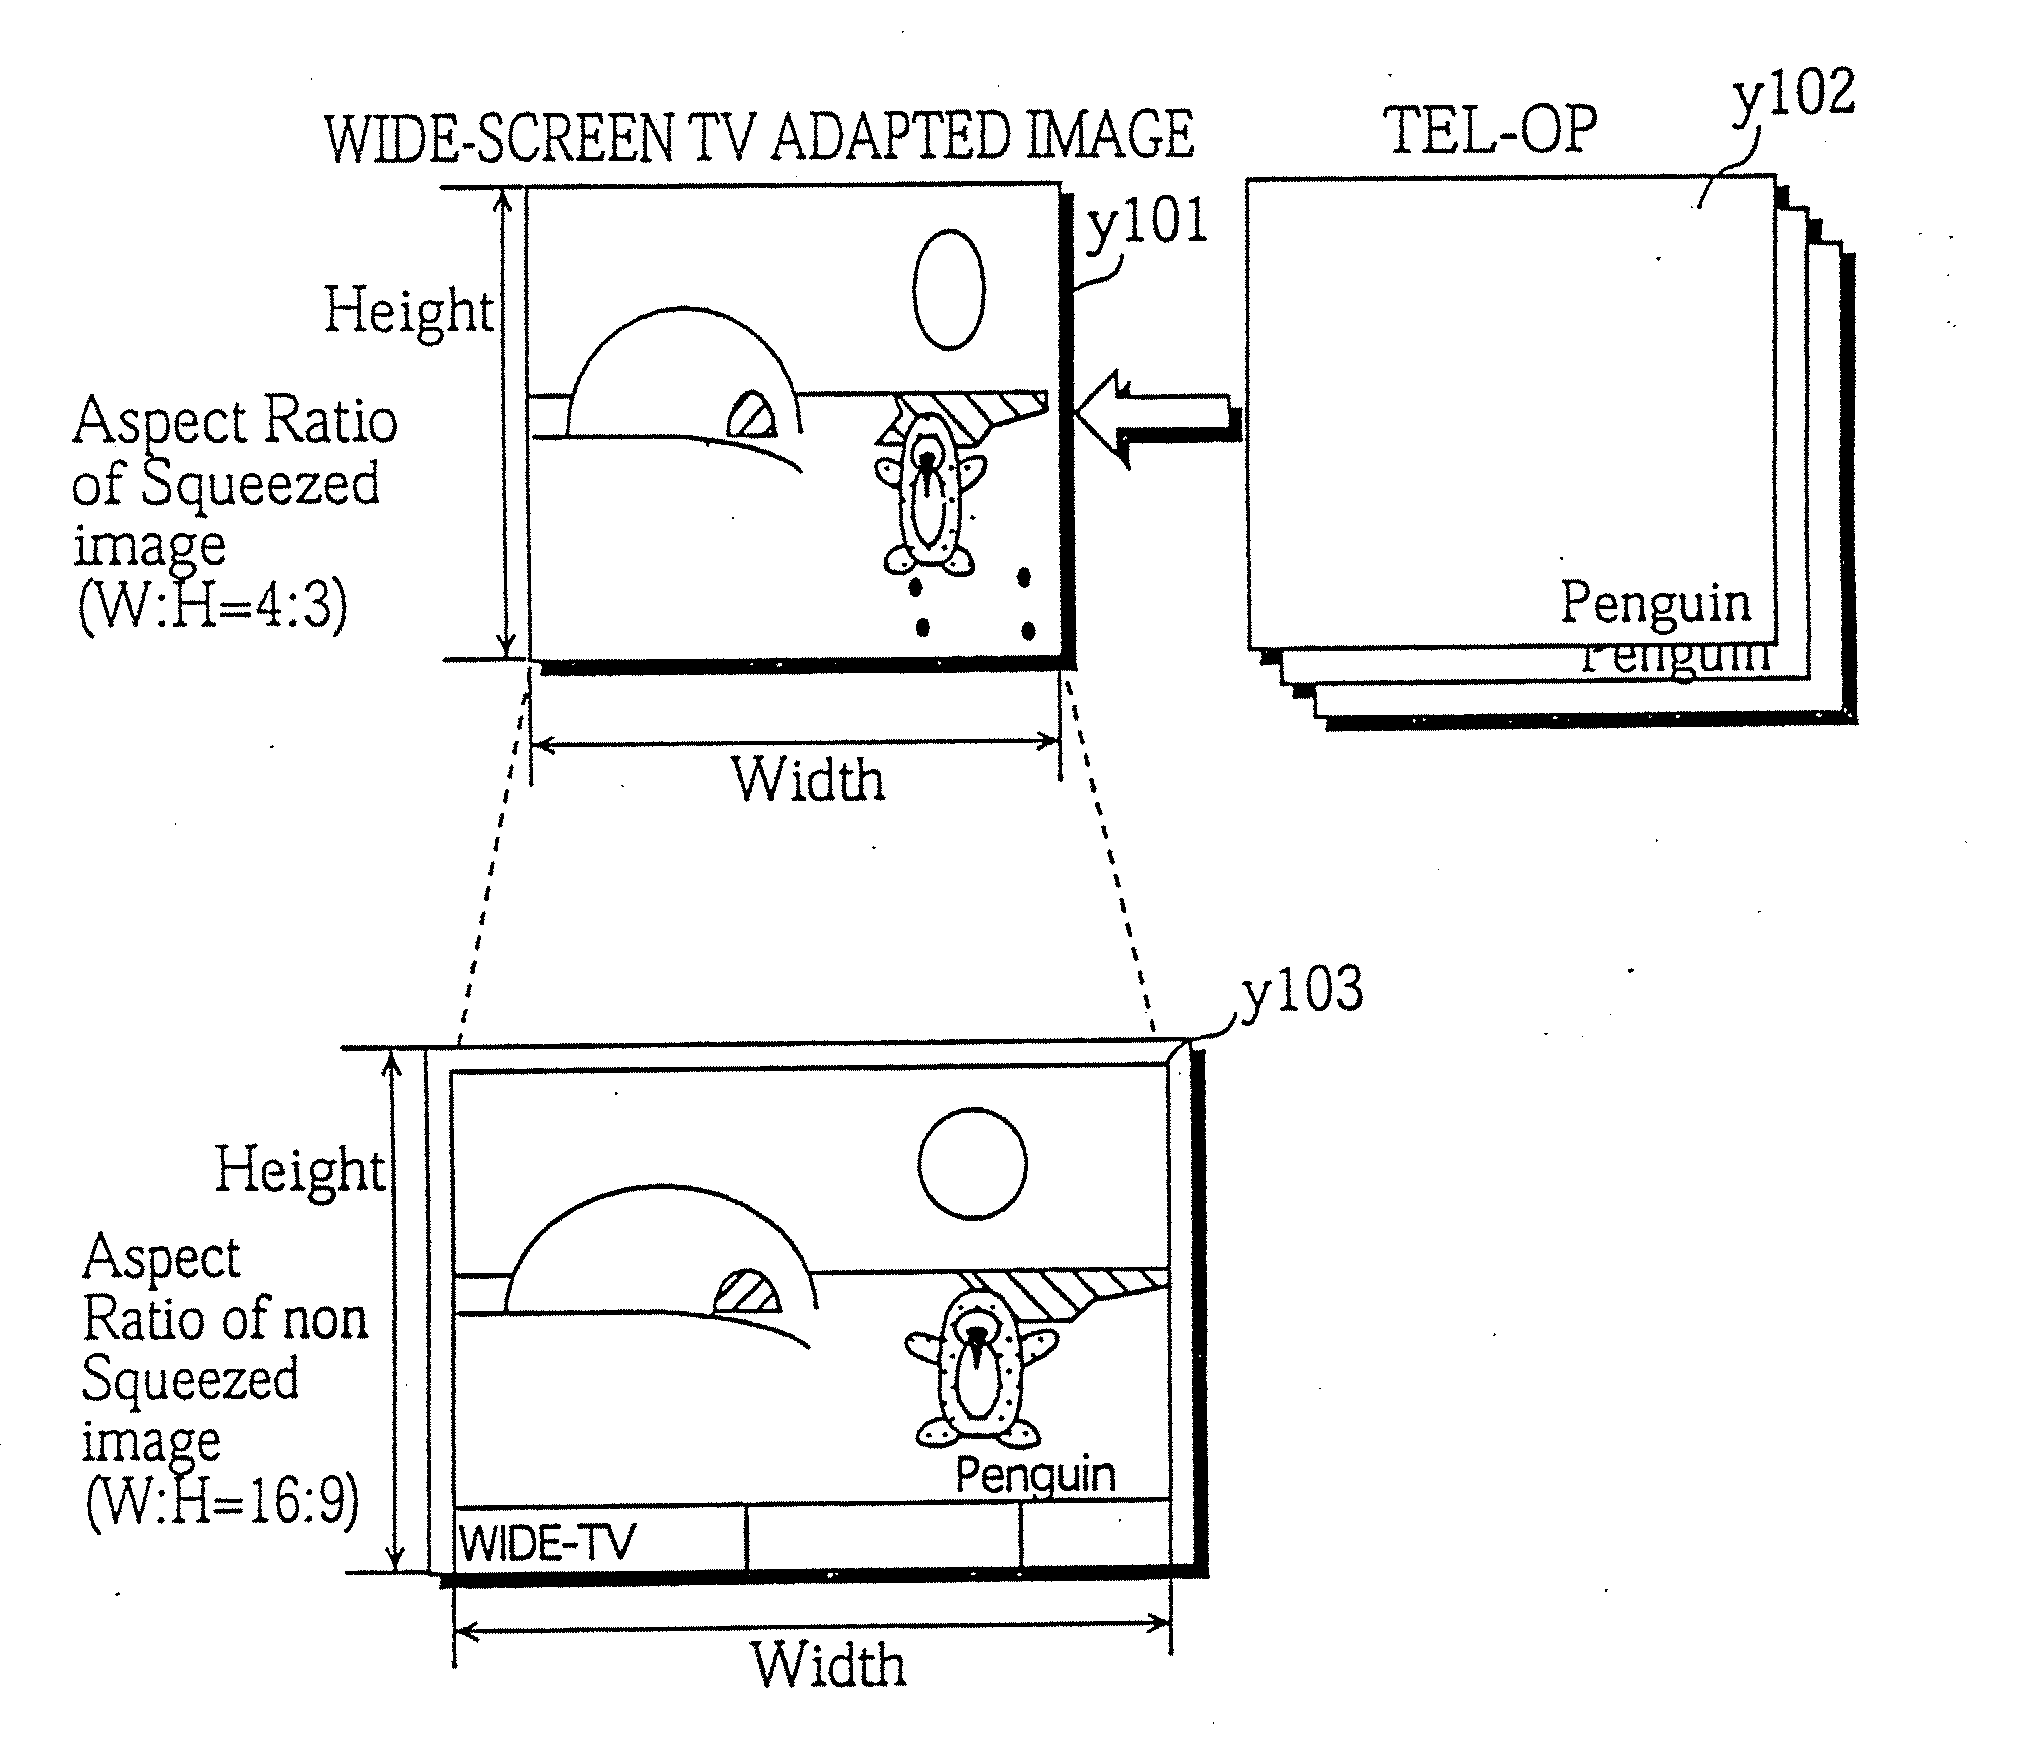 Reproduction apparatus and a reproduction method for video objects received by digital broadcast